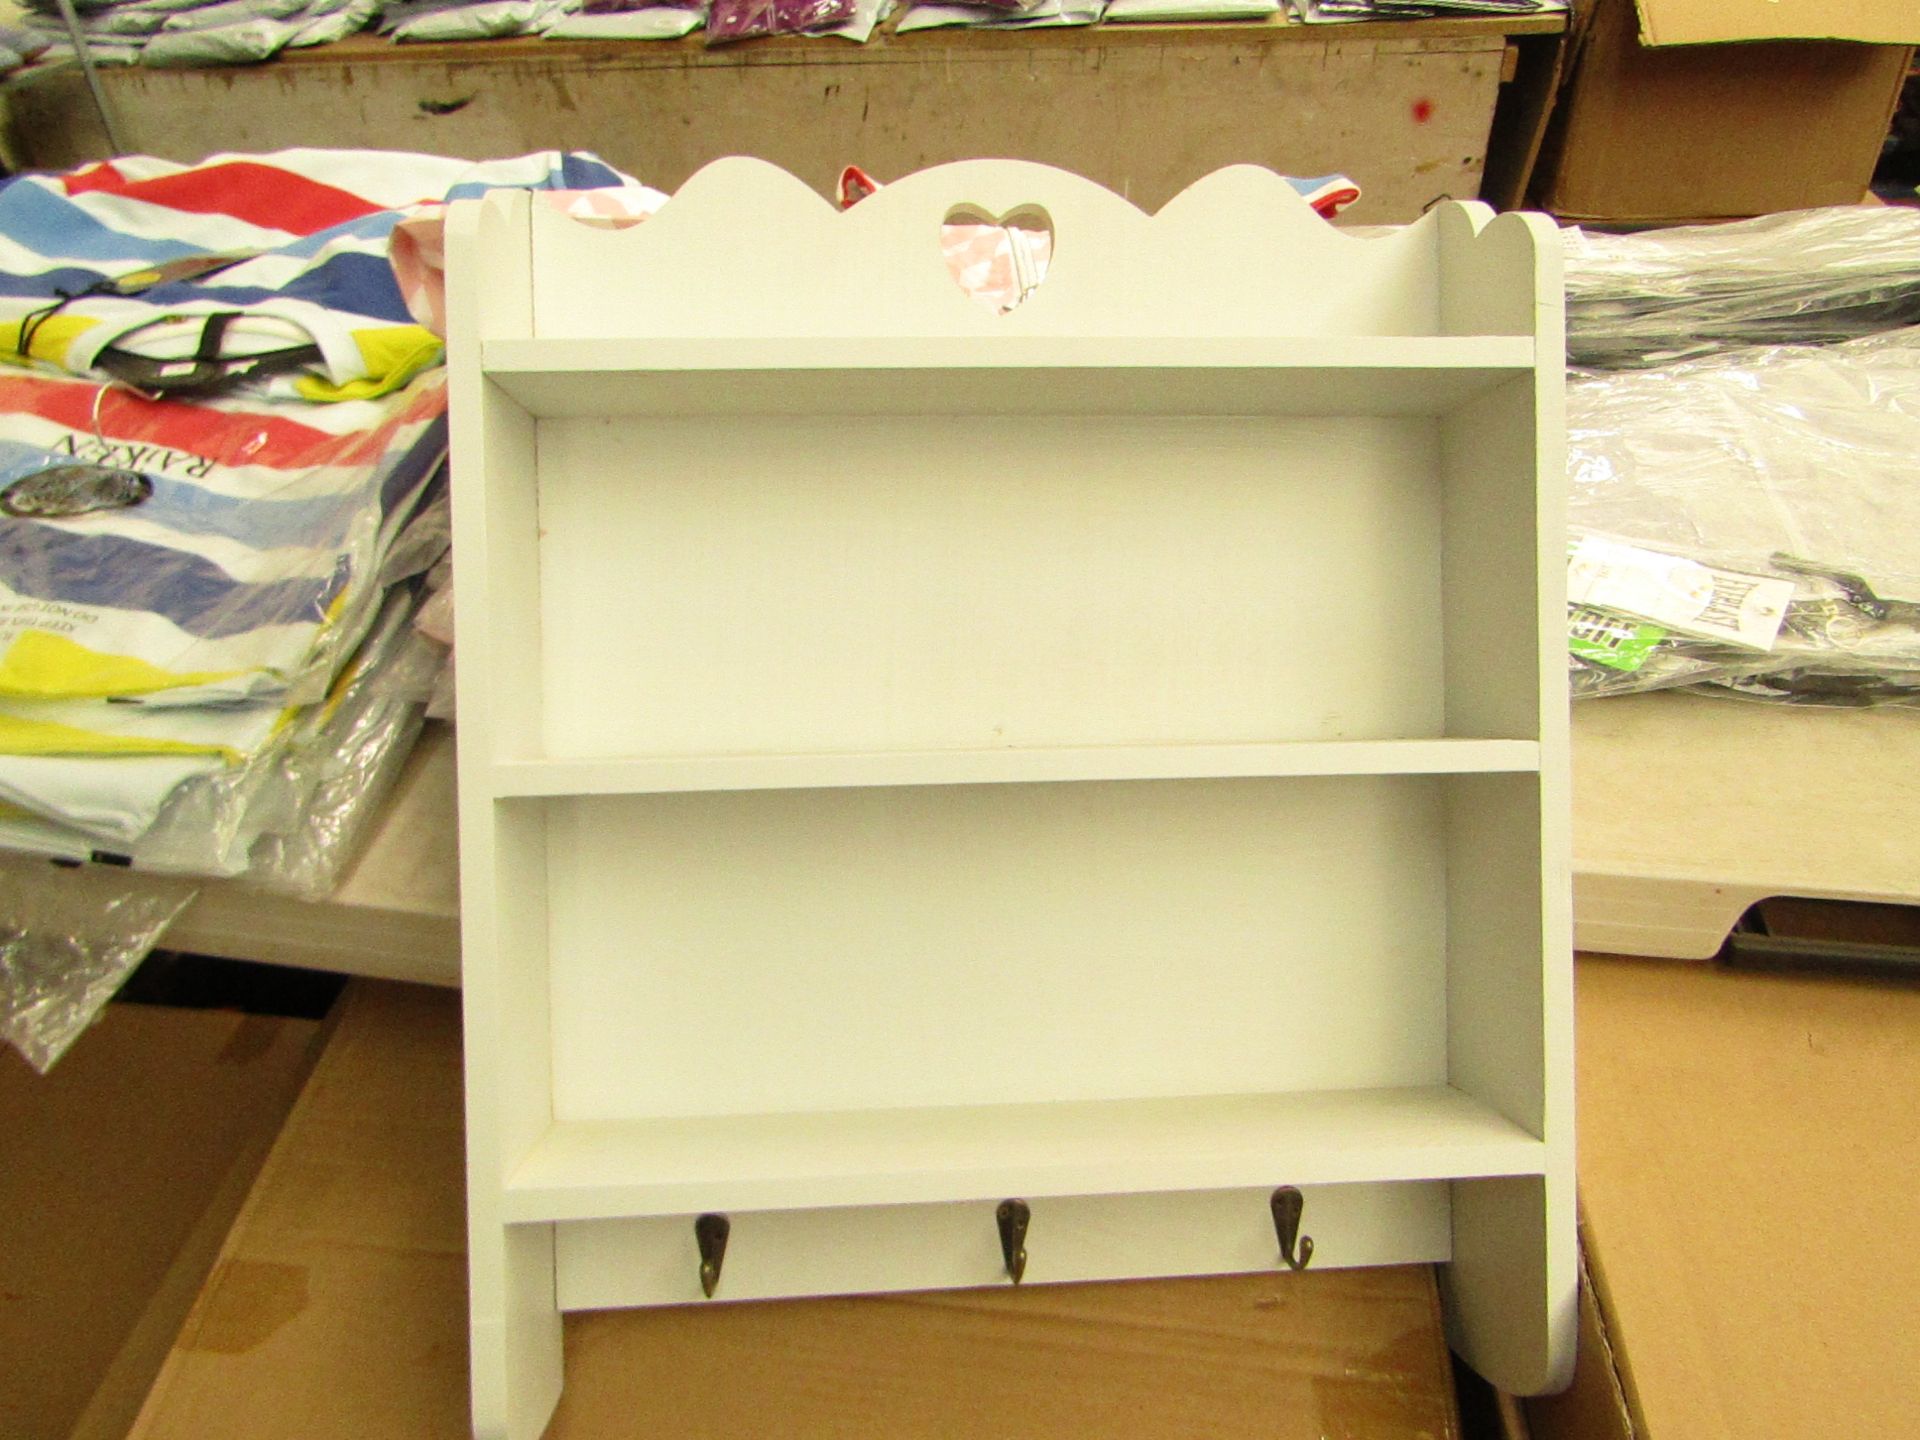 Flatpack 3 Tier Shelving Unit with 3 Hooks. New & Boxed. See image